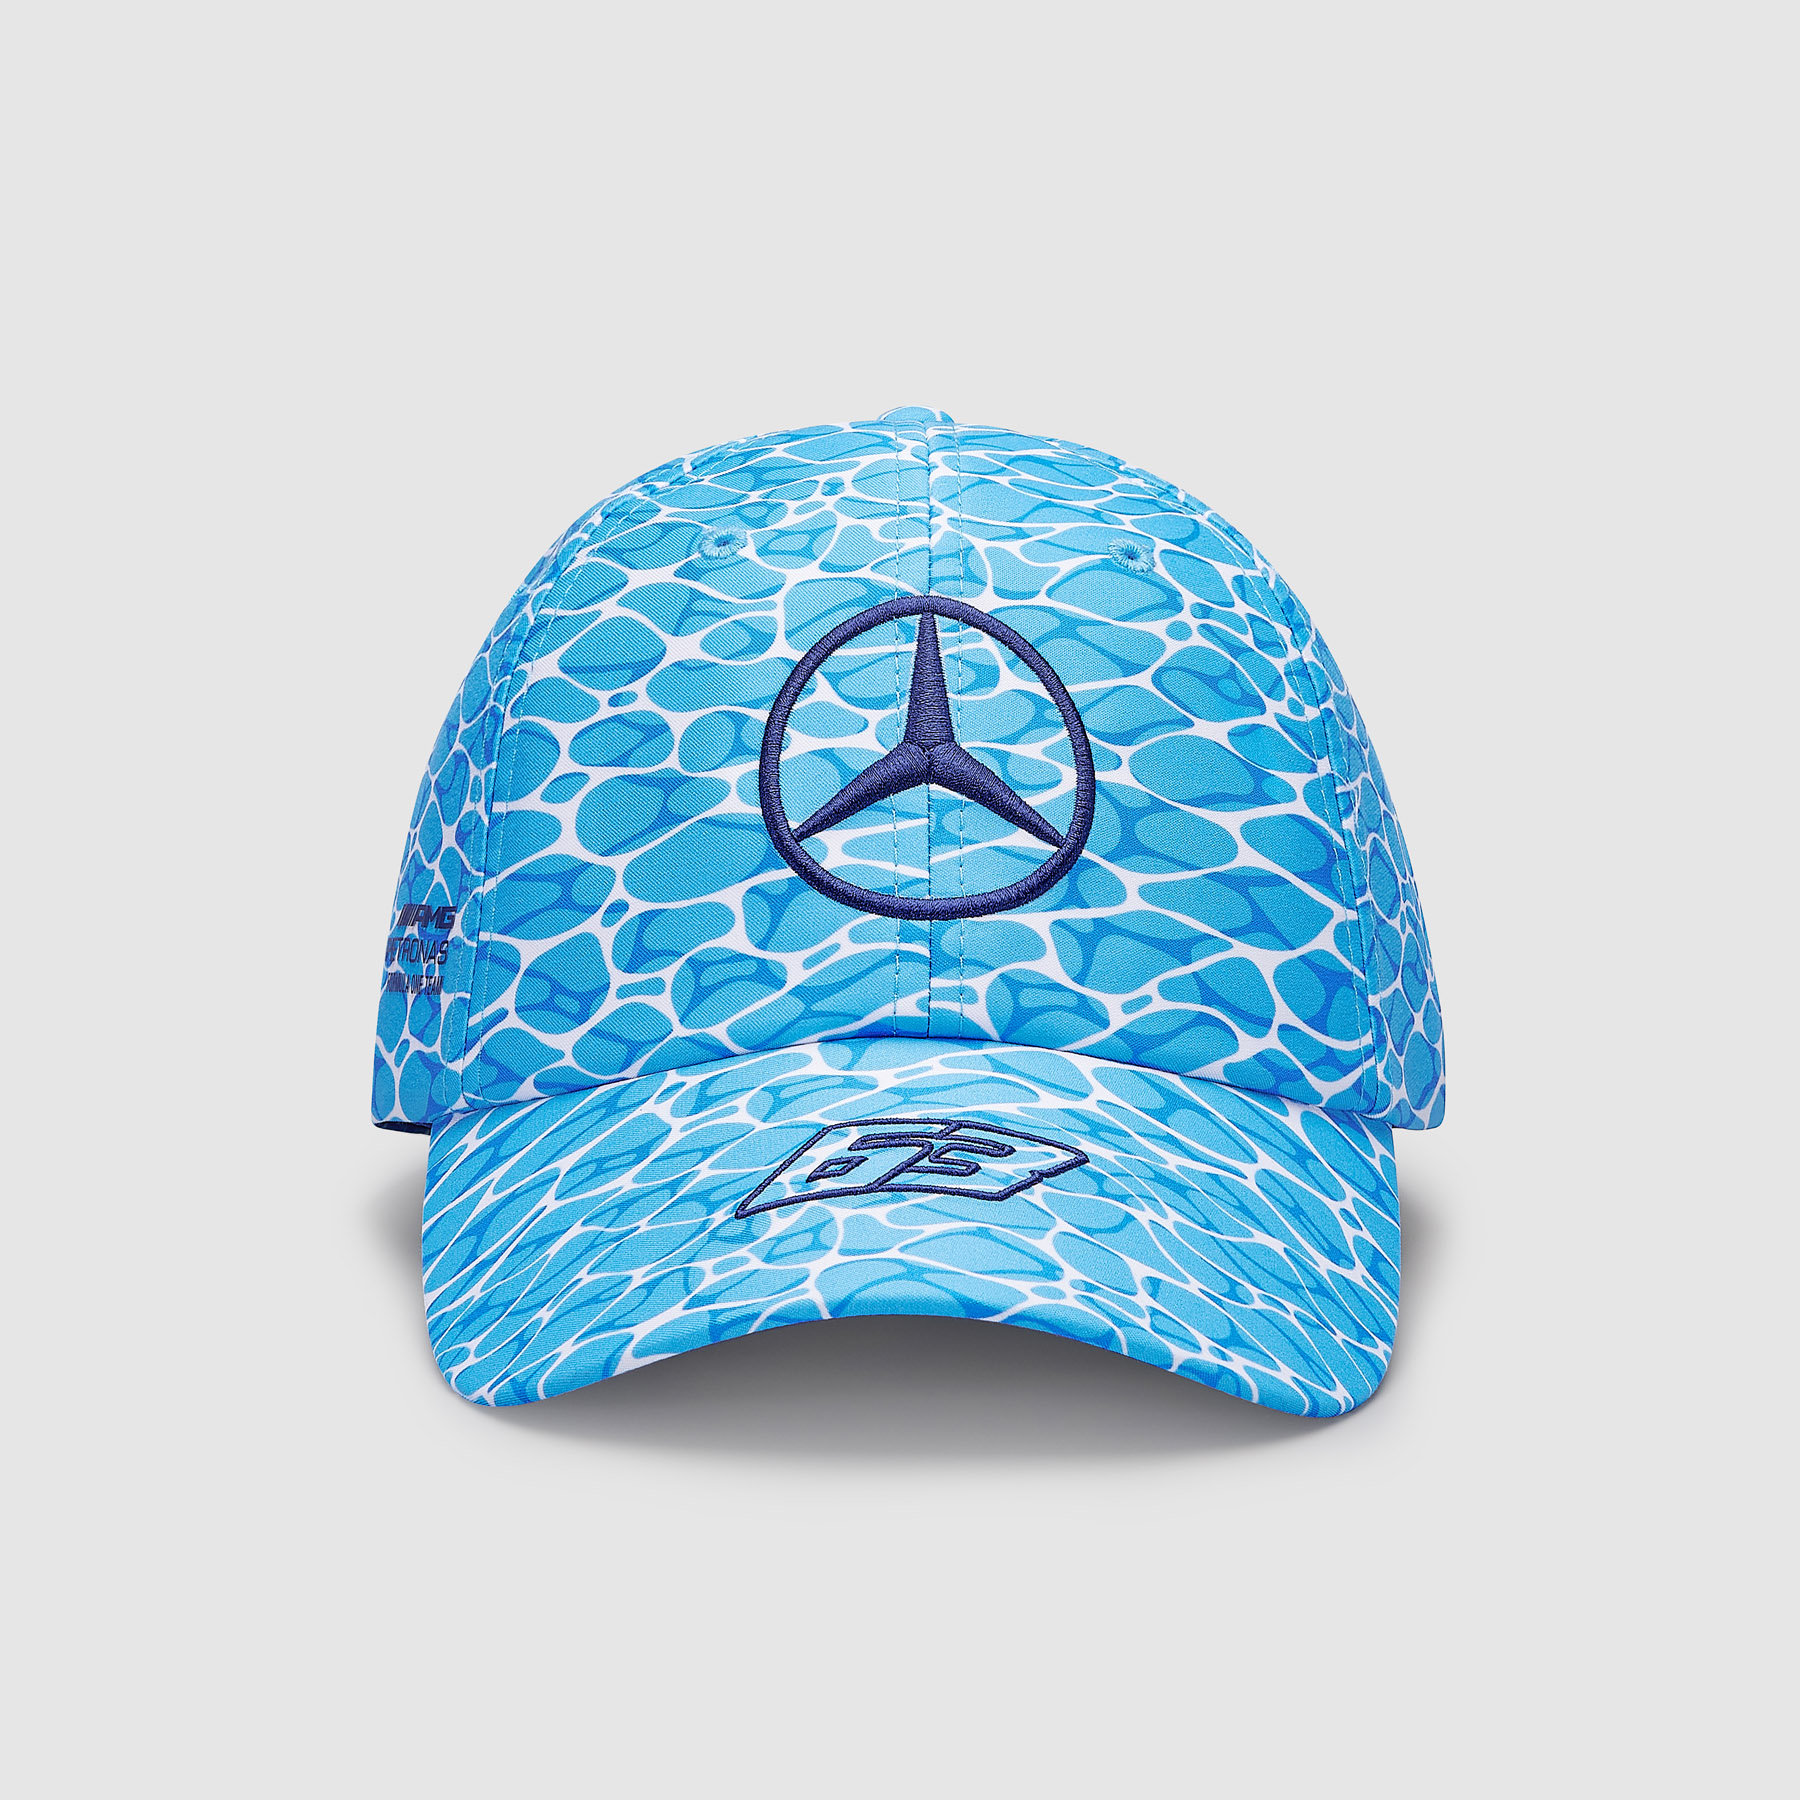 Mercedes Benz F1 SE George Russell No Diving Miami USA GP Bucket Hat Blue